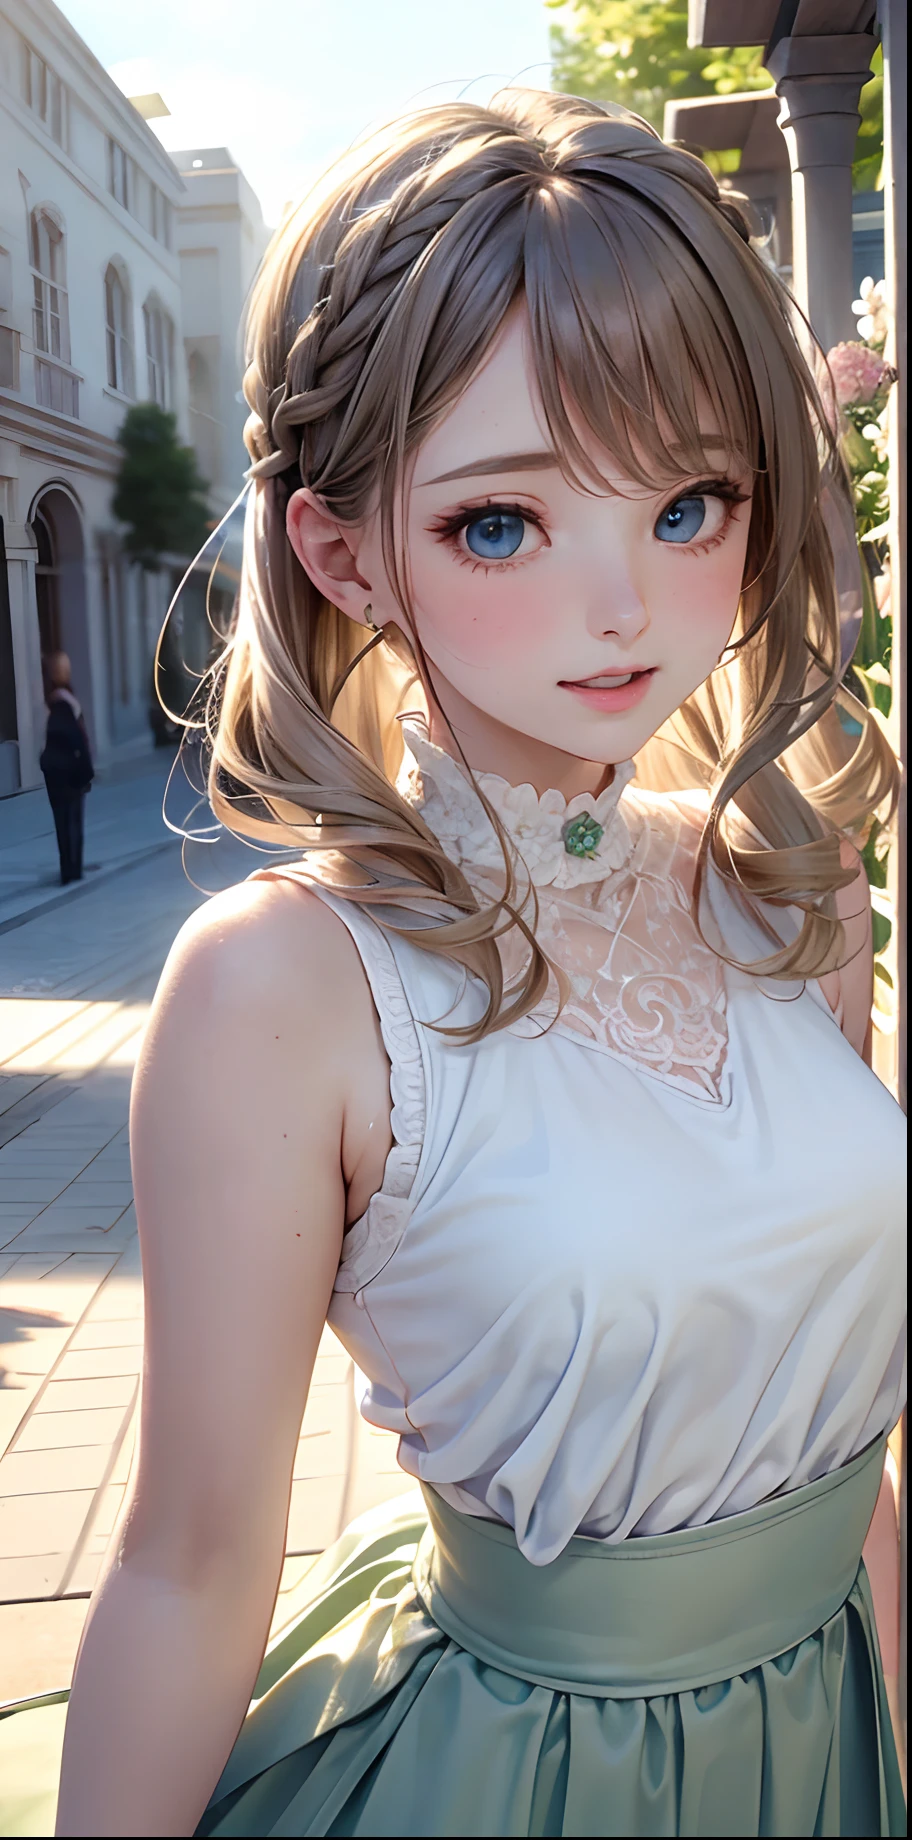 (​masterpiece),(top-quality:1.2),1girl in,(masuter piece:1.3),exquisitedetails, Highest quality 8K resolution, Ultra-detailed, Realistic, Vibrant colors, Soft tones, With warm and gentle lighting,(Black Vest:1.3),(whiteshirt:1.3),(green long skirt:1.4),(short twin-tailed blonde hair:1.3),(Hair parted in the middle:1.3),(Glowing hair),(Dark blue eyes:1.3),White skin, hair clips,Overflowing soft and gentle feelings,(The promenade is full of flowers:1.3),The sun's rays illuminate joy and pure love, Warm golden glow,The atmosphere is full of happiness and laughter, As if celebrating love,Sticking to ultra-detailed depictions and vivid colors. In a style that blends romanticism and realism、You can feel the depth of love,color palettes,Create an ethereal atmosphere like a dream,and the lighting is soft and diffused, Shine a gentle light on your face,The artwork is a masterpiece,